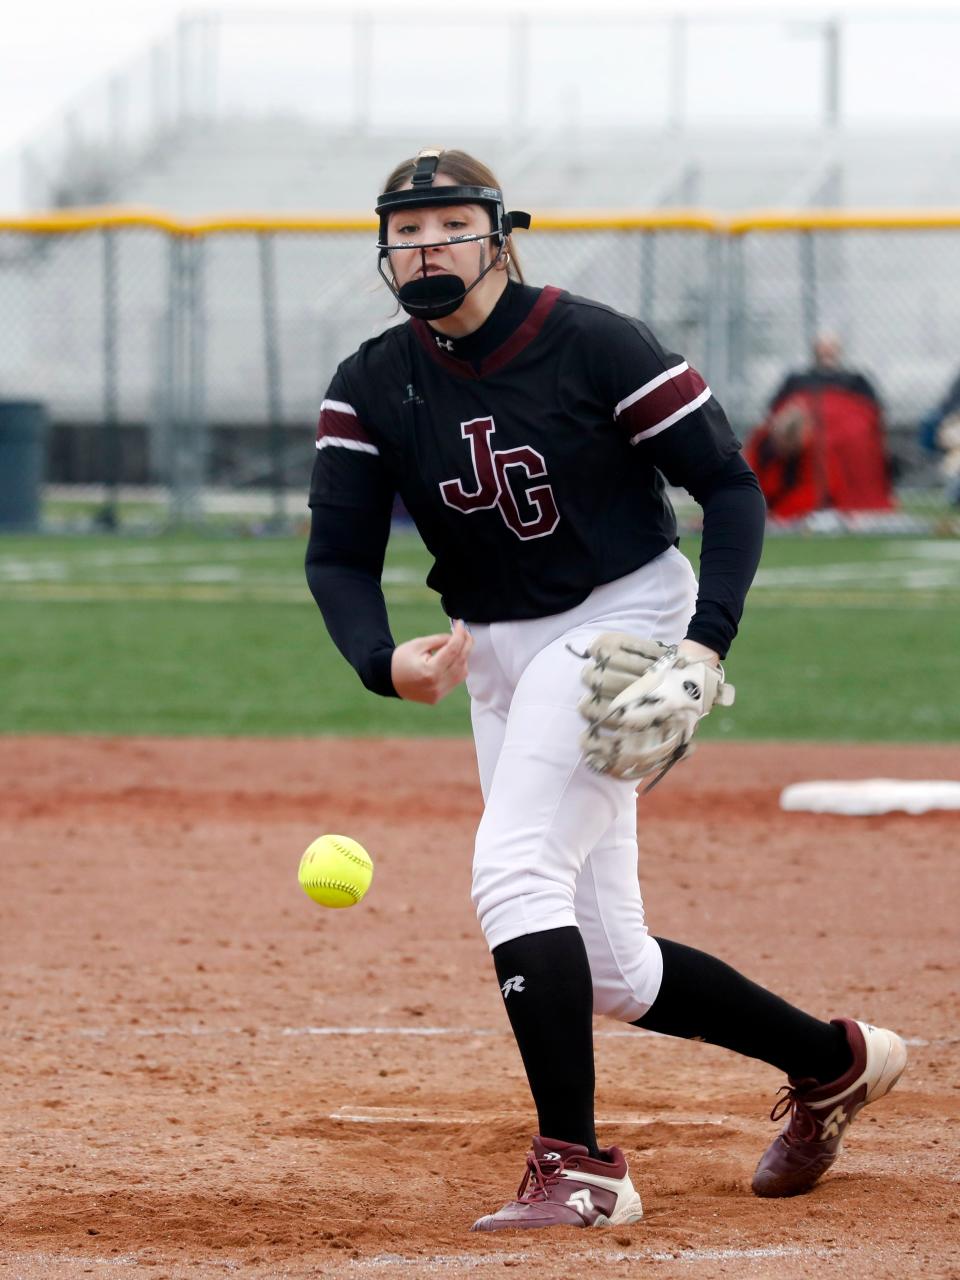 John Glenn junior pitcher Sydney Marshall fires a ball to the plate during a 10-0 win in five innings against visiting Morgan on Thursday in New Concord. Marshall fired a one-hitter with 10 strikeouts in her return from a back injury.